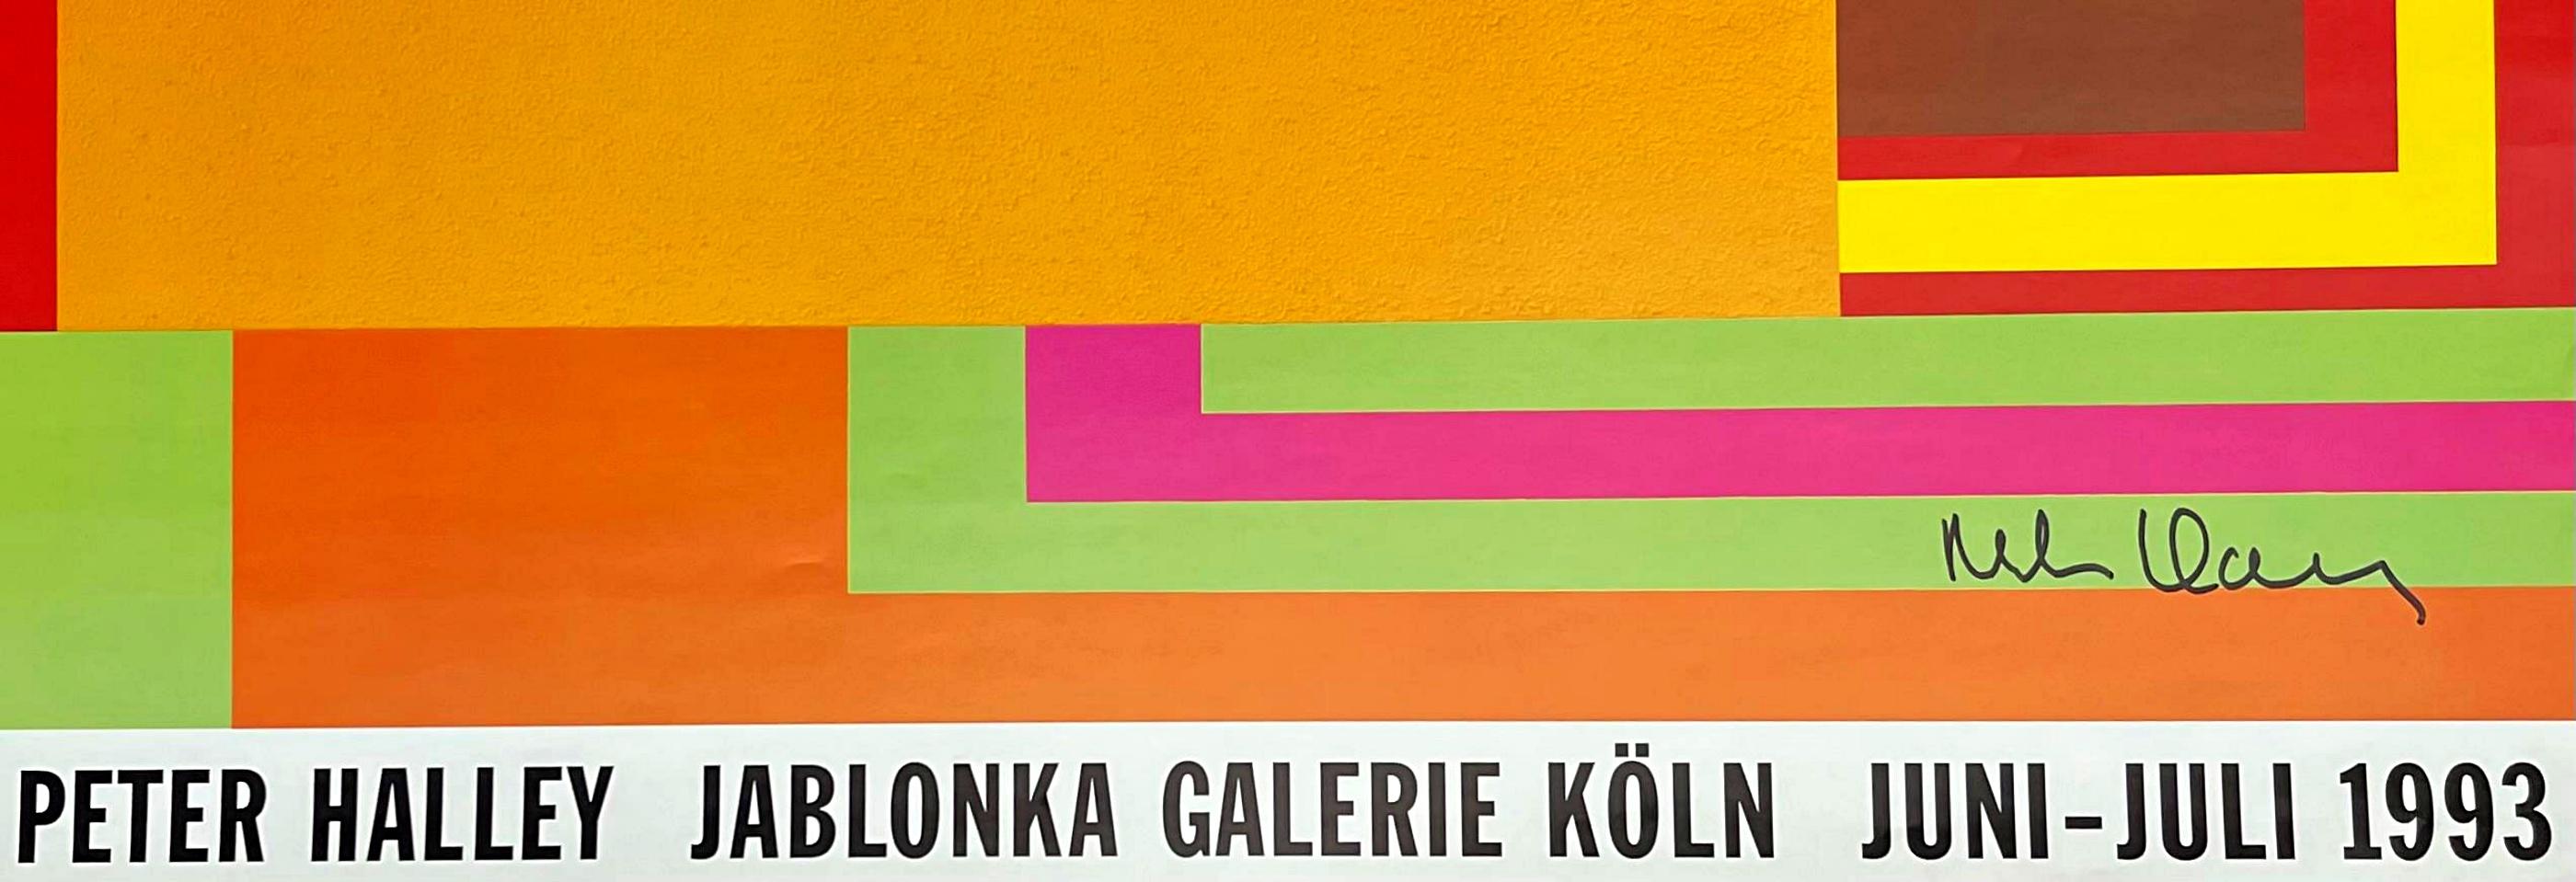 Peter Halley
Peter Halley, Jablonka Galerie, Köln (Hand Signed), 1993
Offset lithograph poster (hand signed by Peter Halley)
26 1/2 × 26 1/2 inches
Unframed
Alpha 137 Gallery is honored to offer this historic offset lithograph of American artist